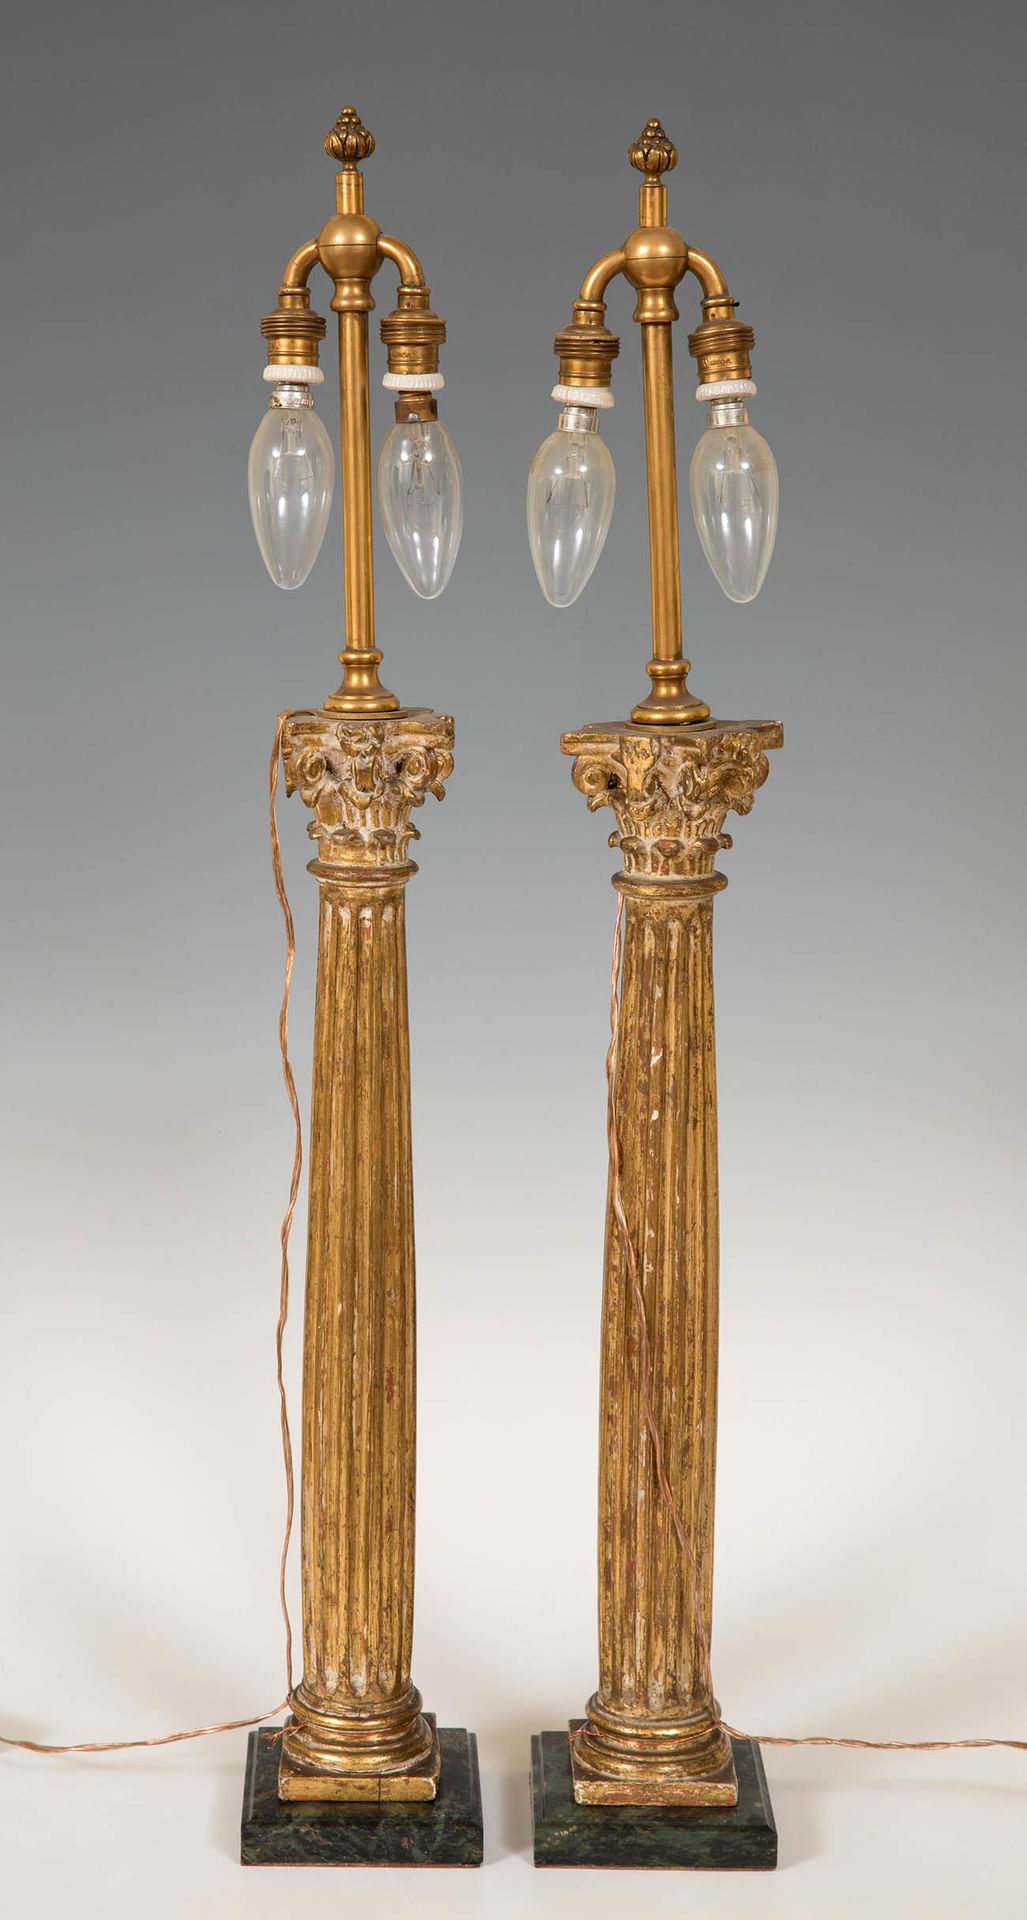 Pair of lamps, following 17th century models; early 20th century. Pair of lamps,&hellip;